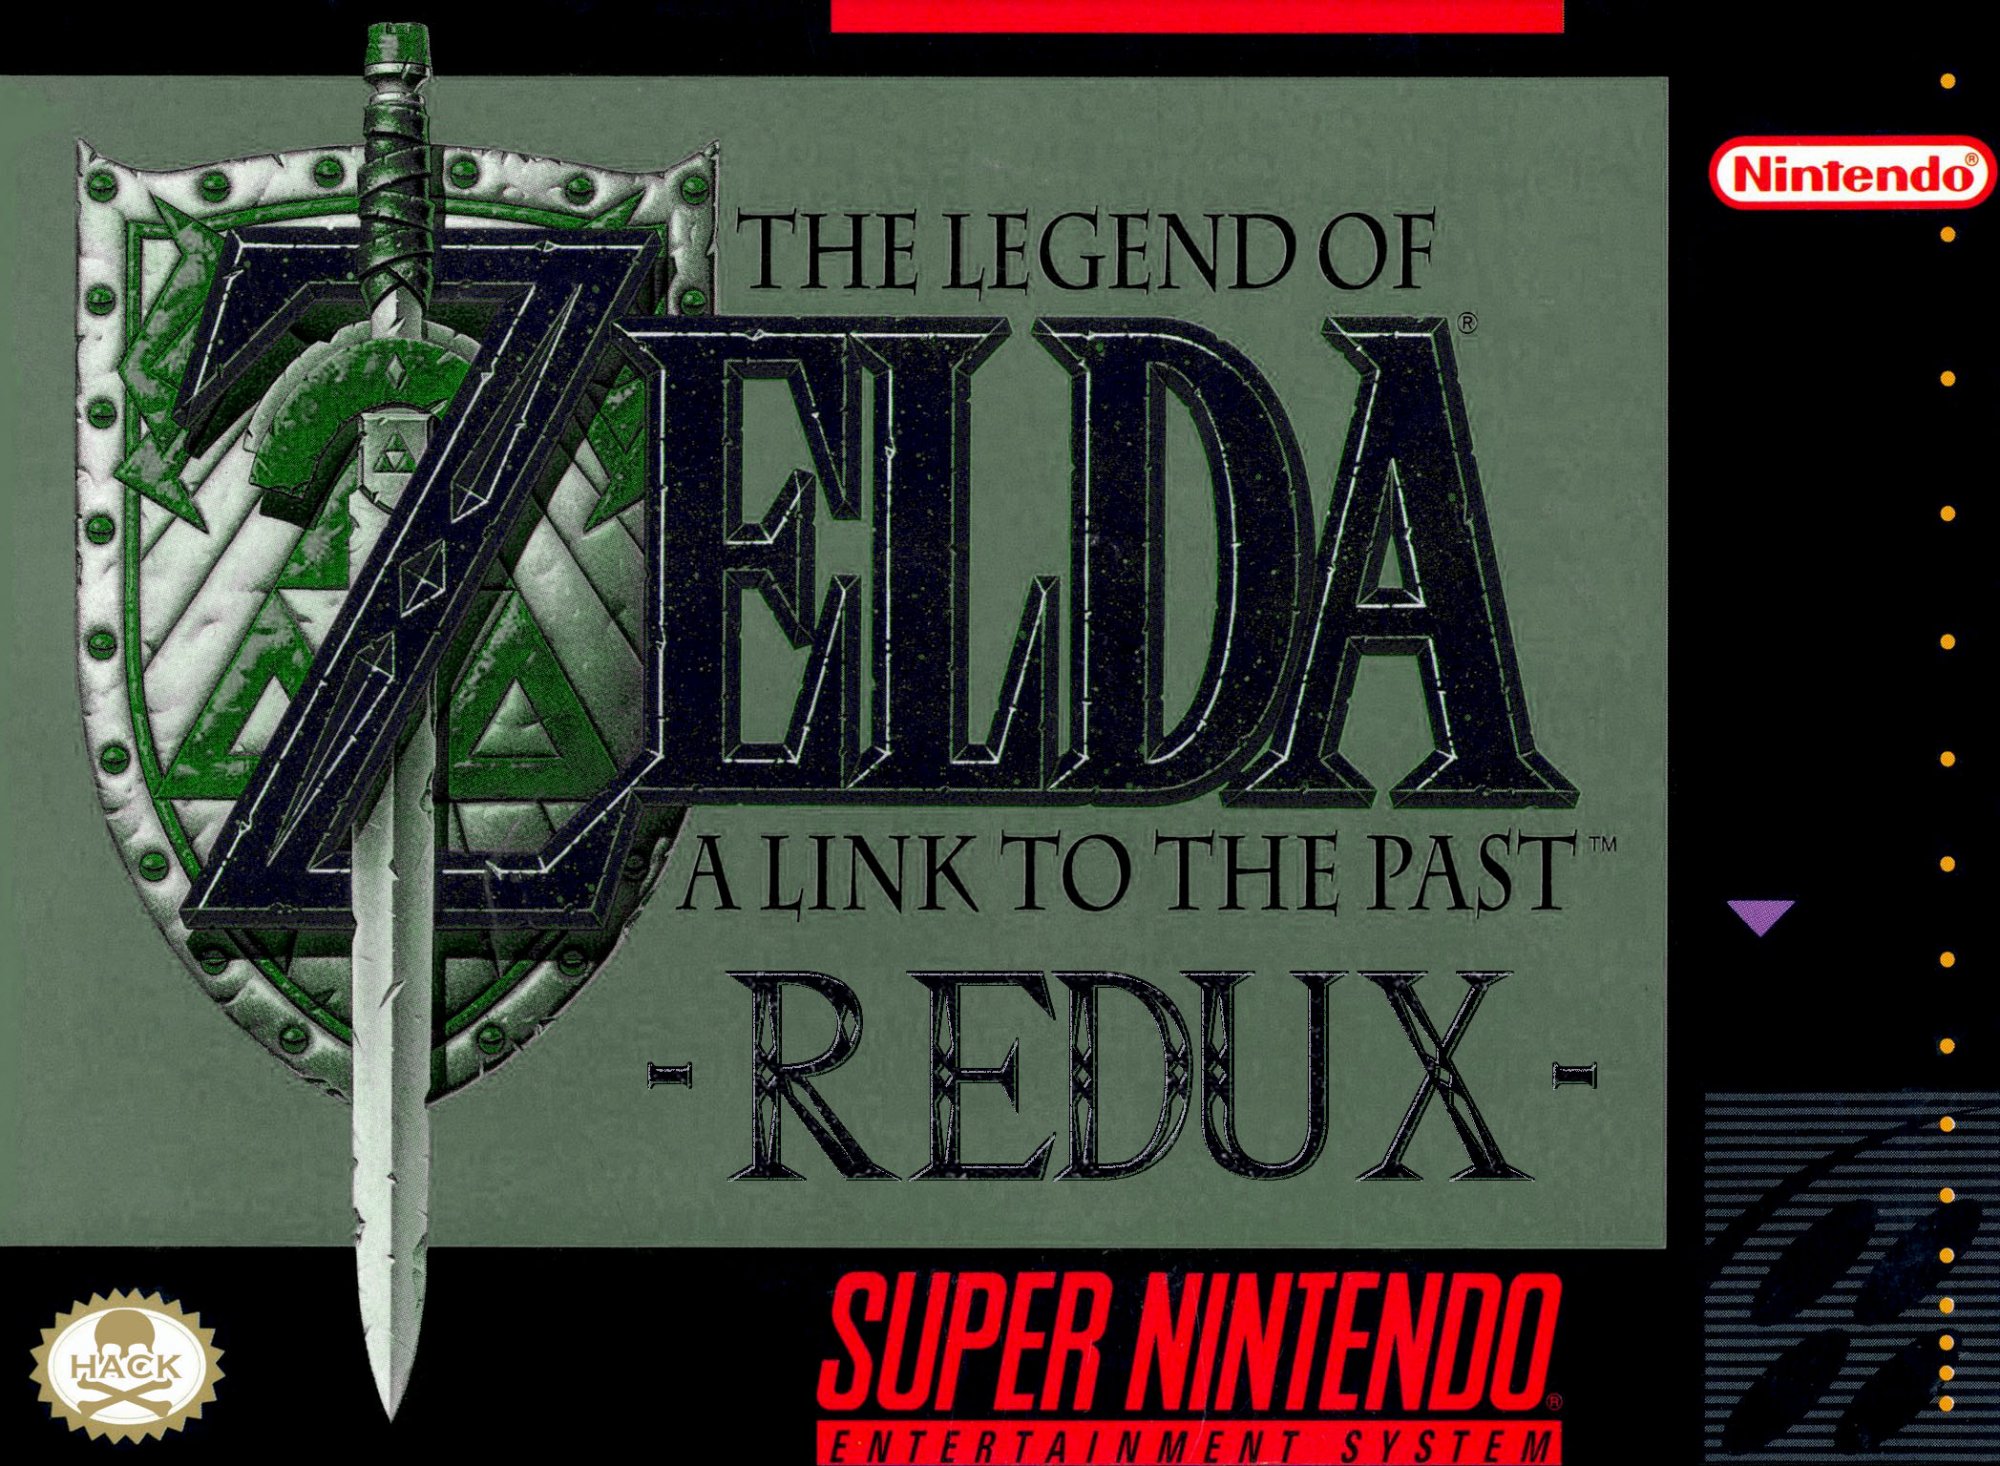  Hacks - A Link to the Past DX